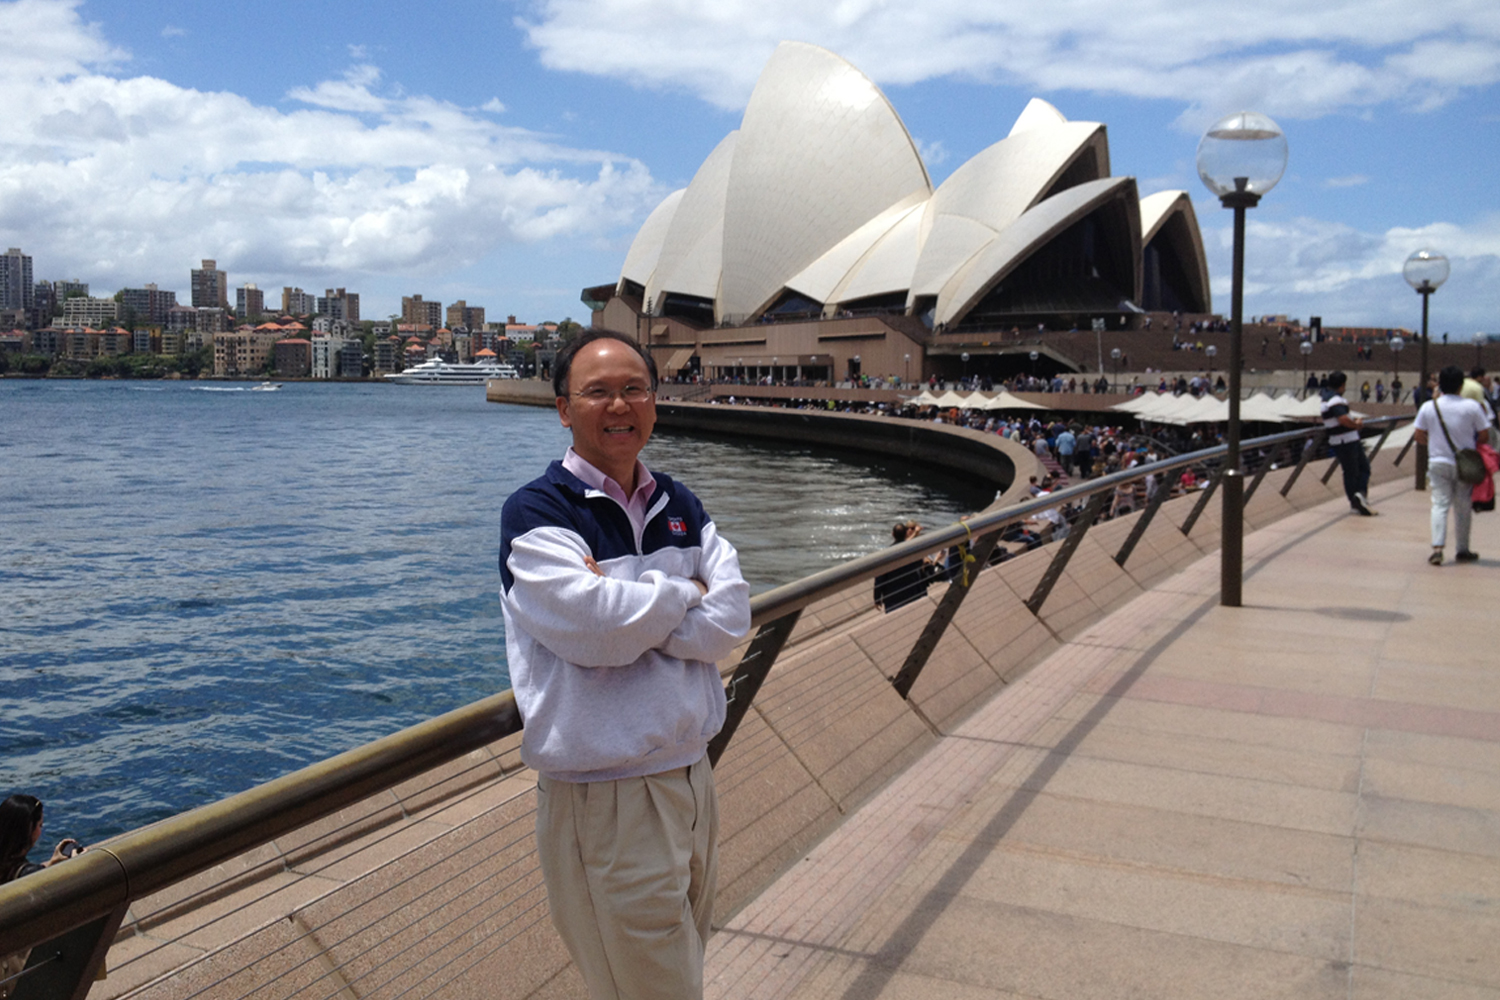 Professor of Mathematics Guozhen Lu stands in front of the Sydney Opera House